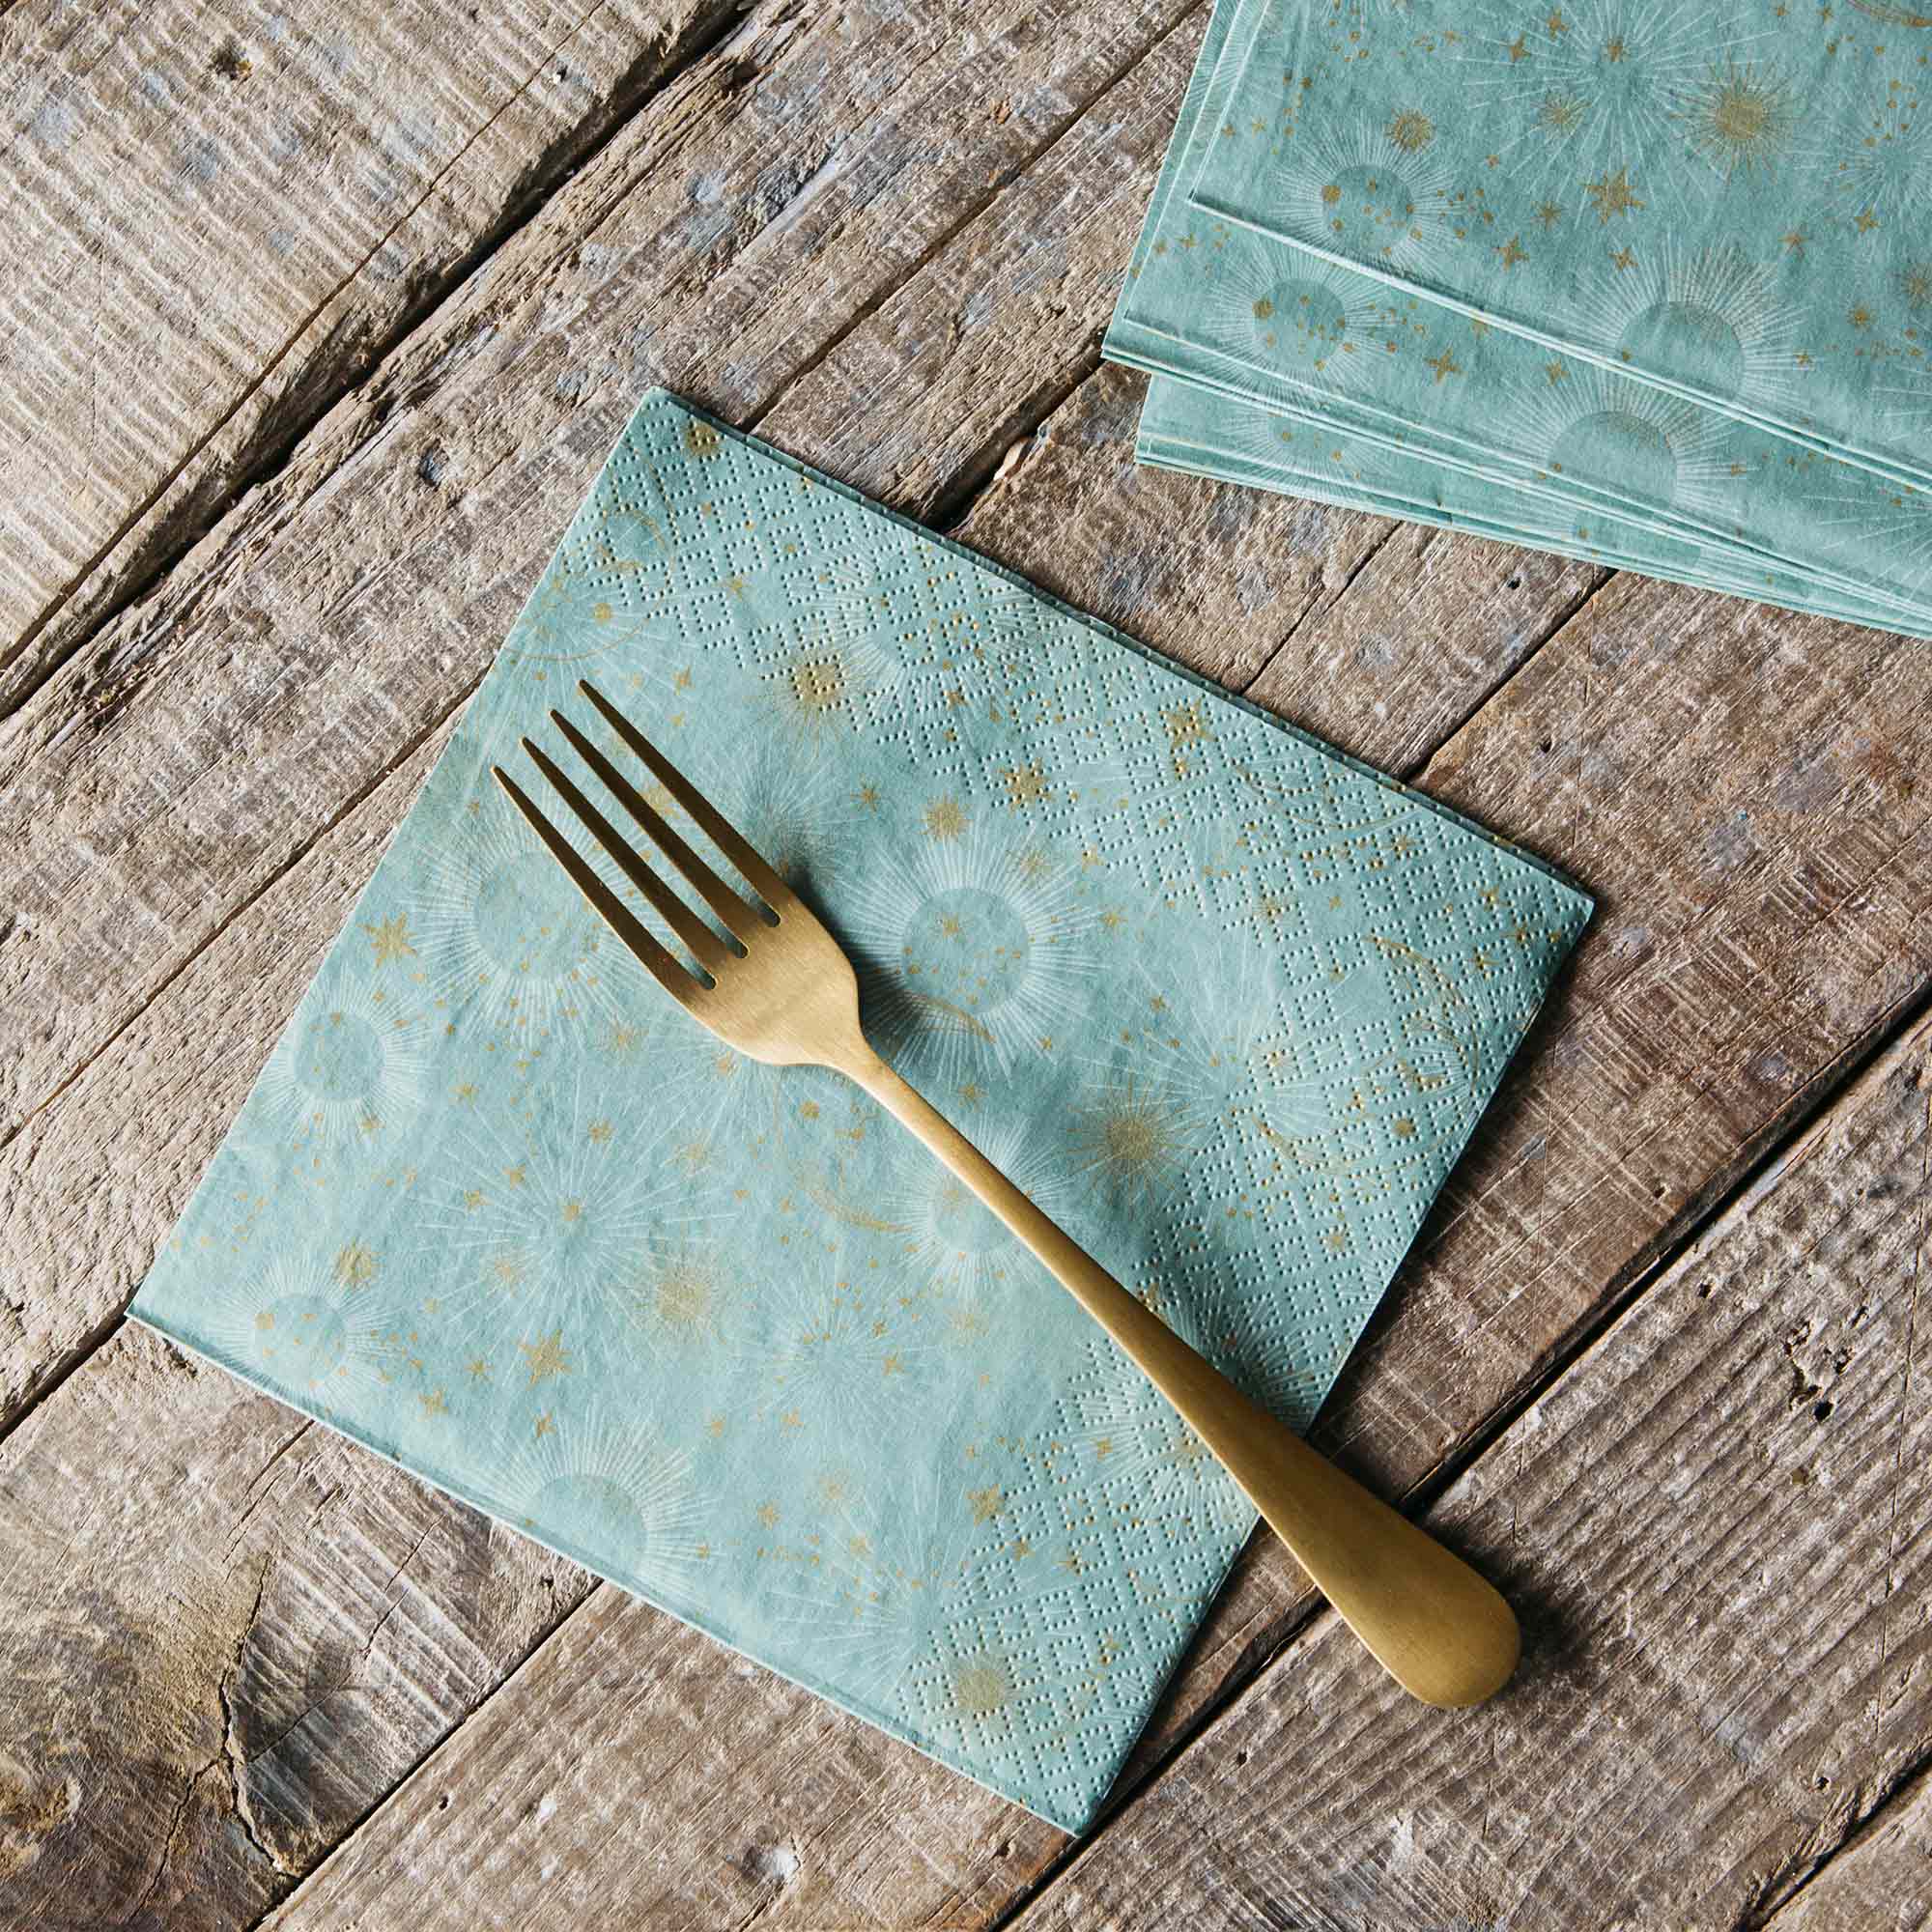 Read more about Graham and green blue stars paper napkins